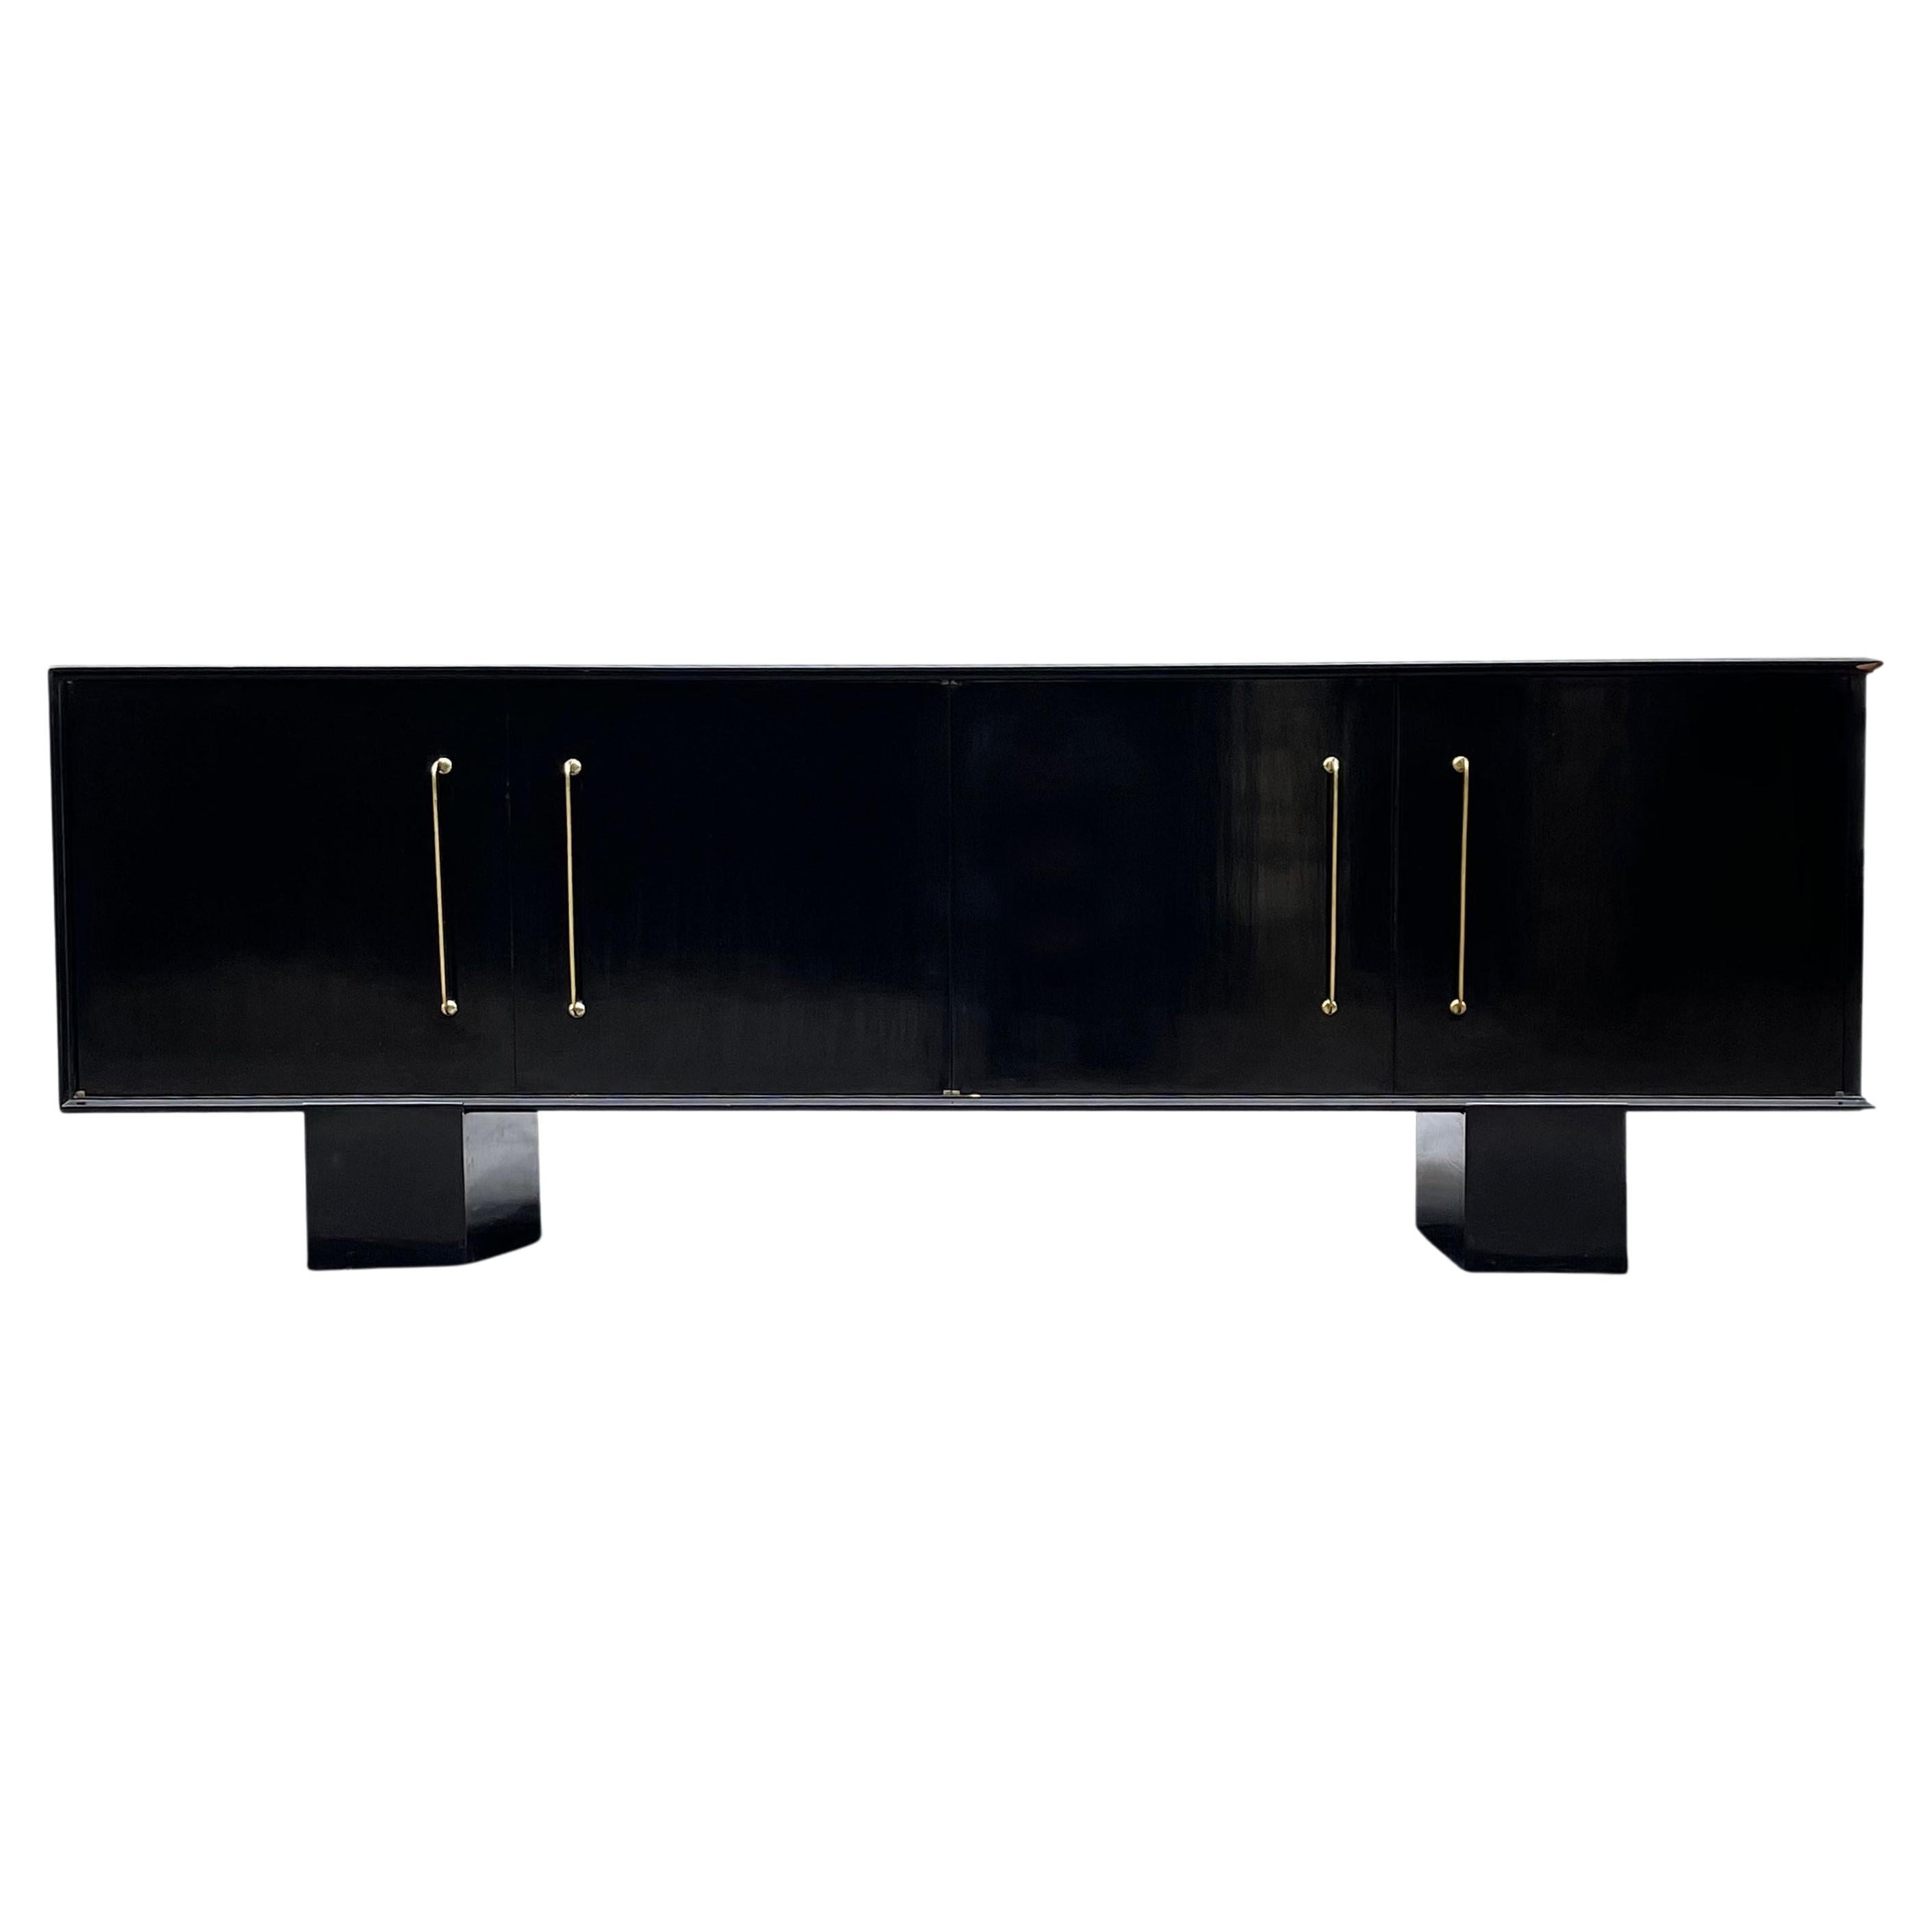 Modernist Art Deco Sideboard Attributed to Jacques Adnet, circa 1940 For Sale